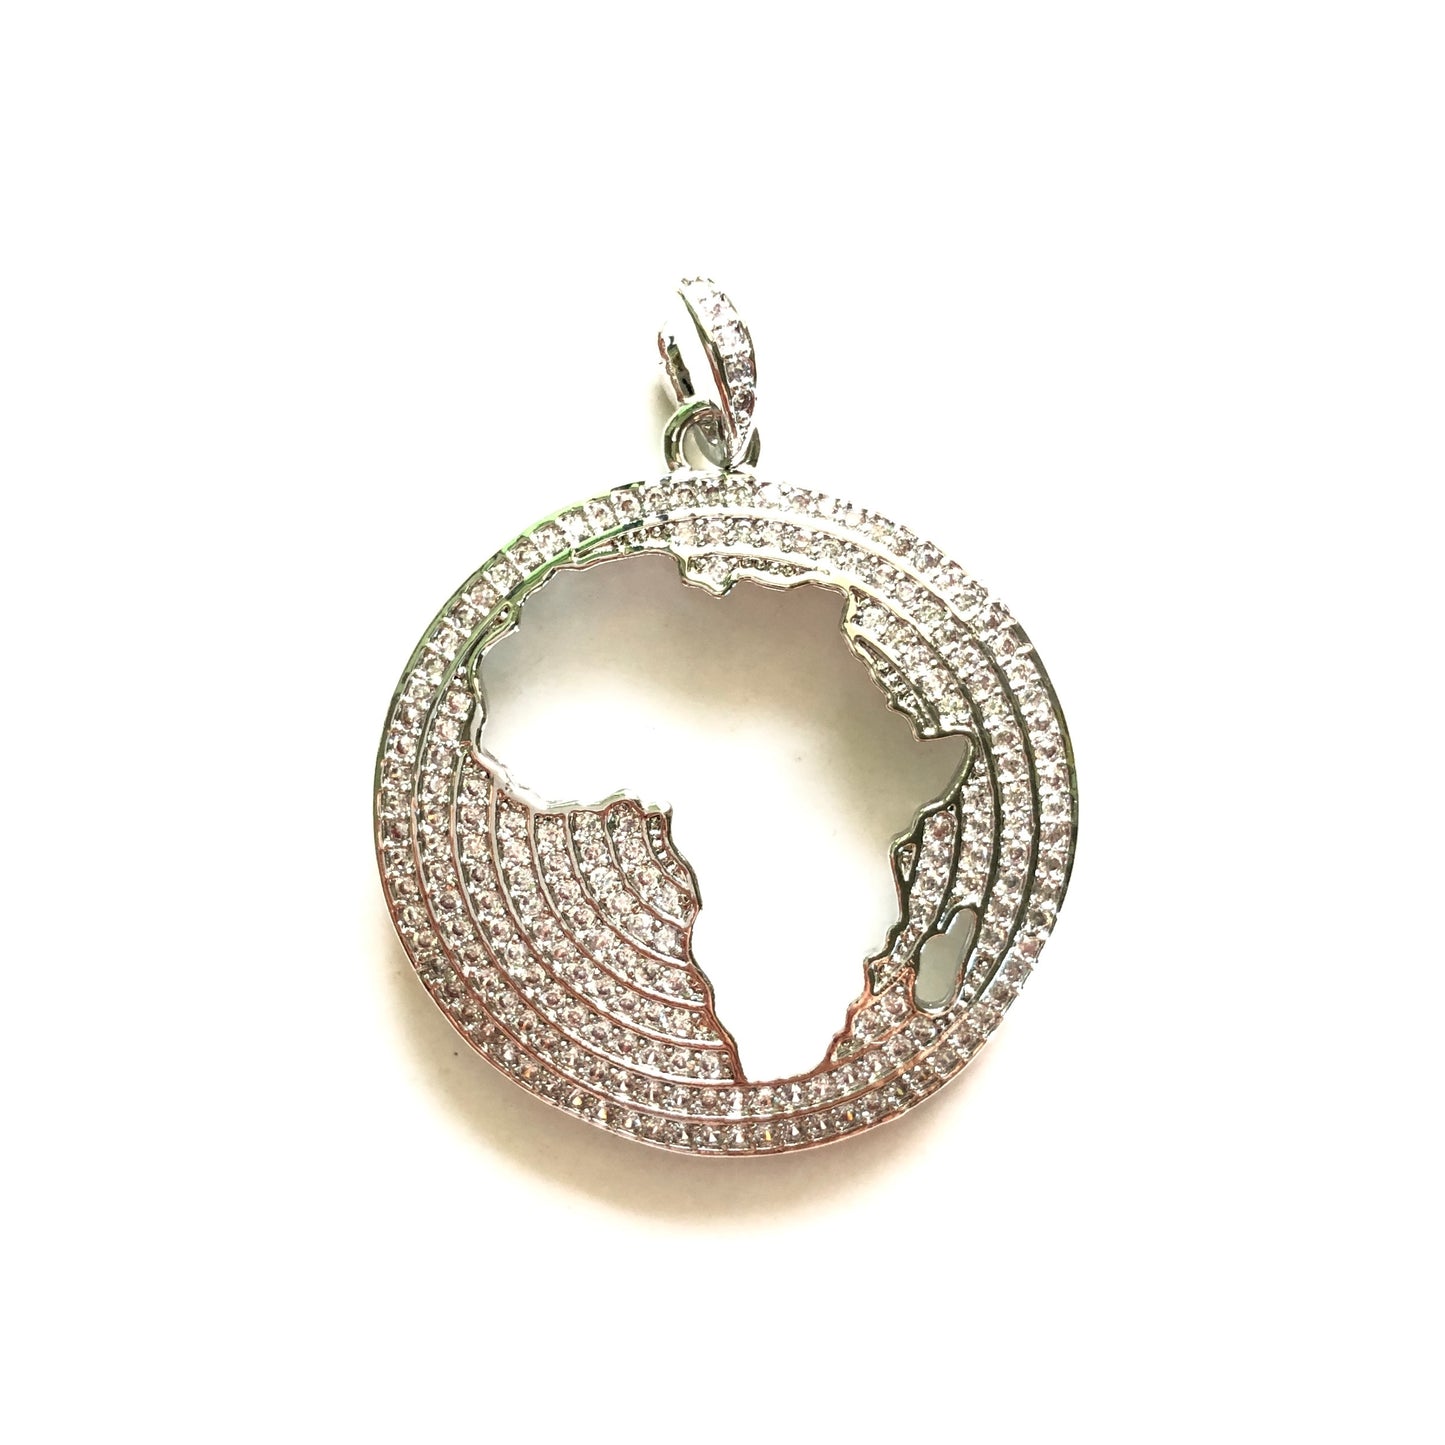 10pcs/lot 27mm CZ Paved Africa Map Charms for Black History Month Juneteenth Awareness Silver CZ Paved Charms Juneteenth & Black History Month Awareness Maps On Sale Charms Beads Beyond